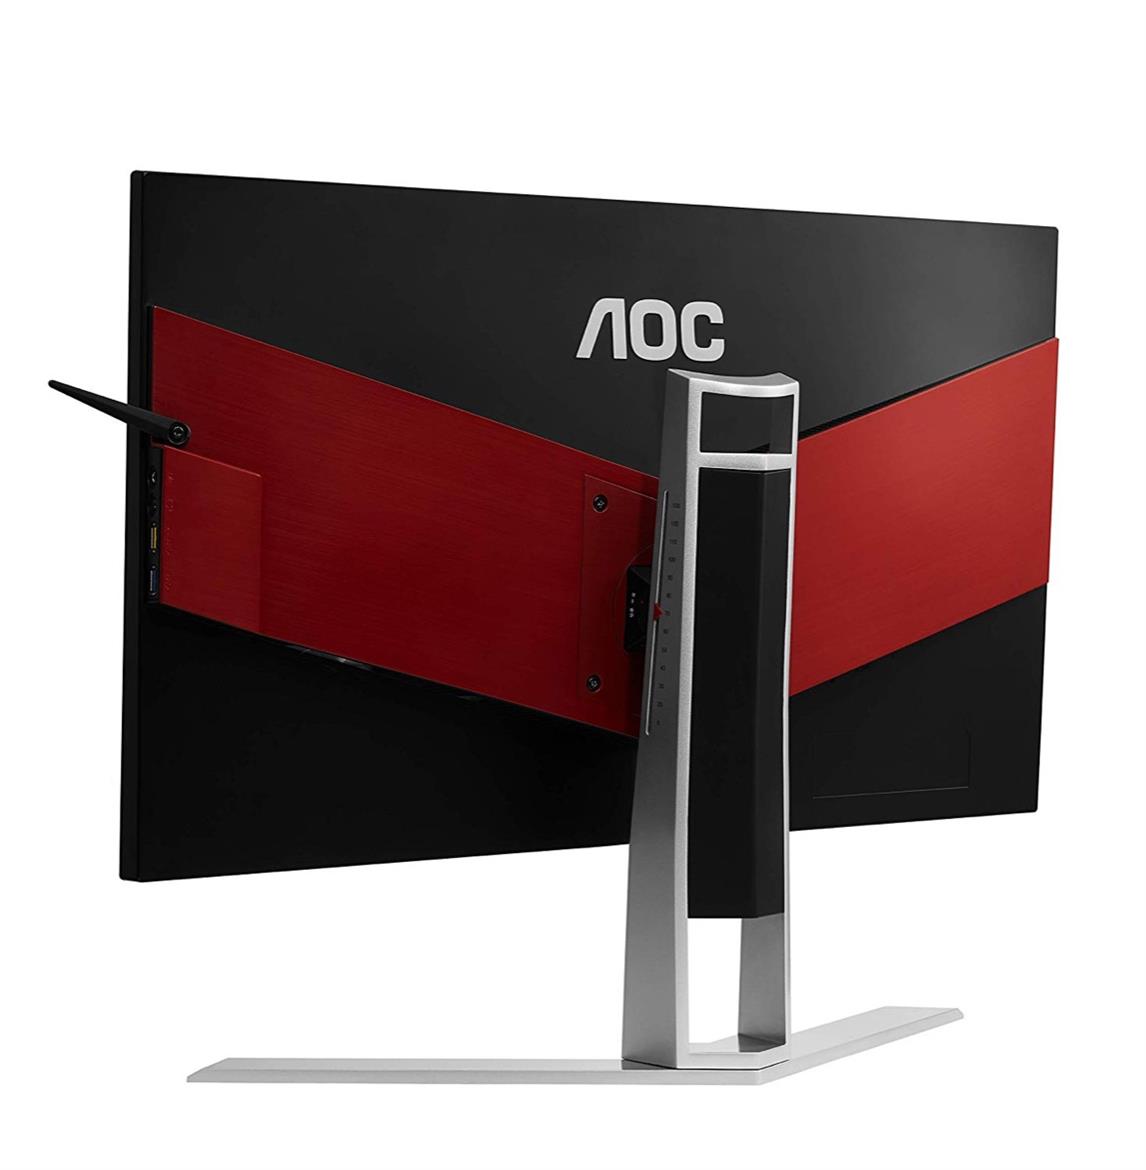 AOC Launches Agon Gaming Monitors With Crazy Fast 0.5ms Response Times And 240Hz FreeSync